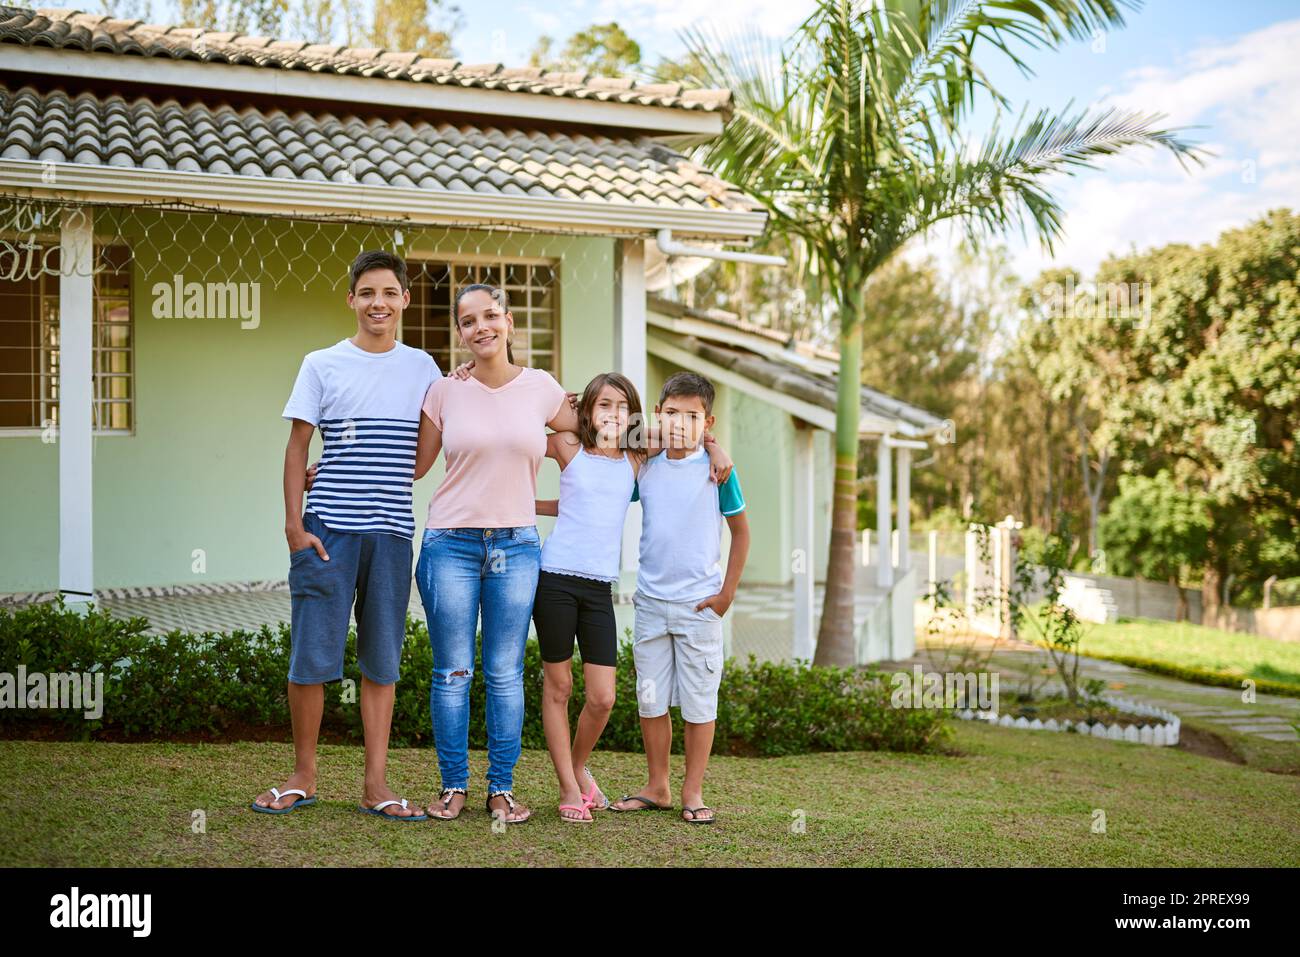 Life can be many things but family makes it true. Portrait of a happy young woman standing together with her daughter and sons in their backyard. Stock Photo